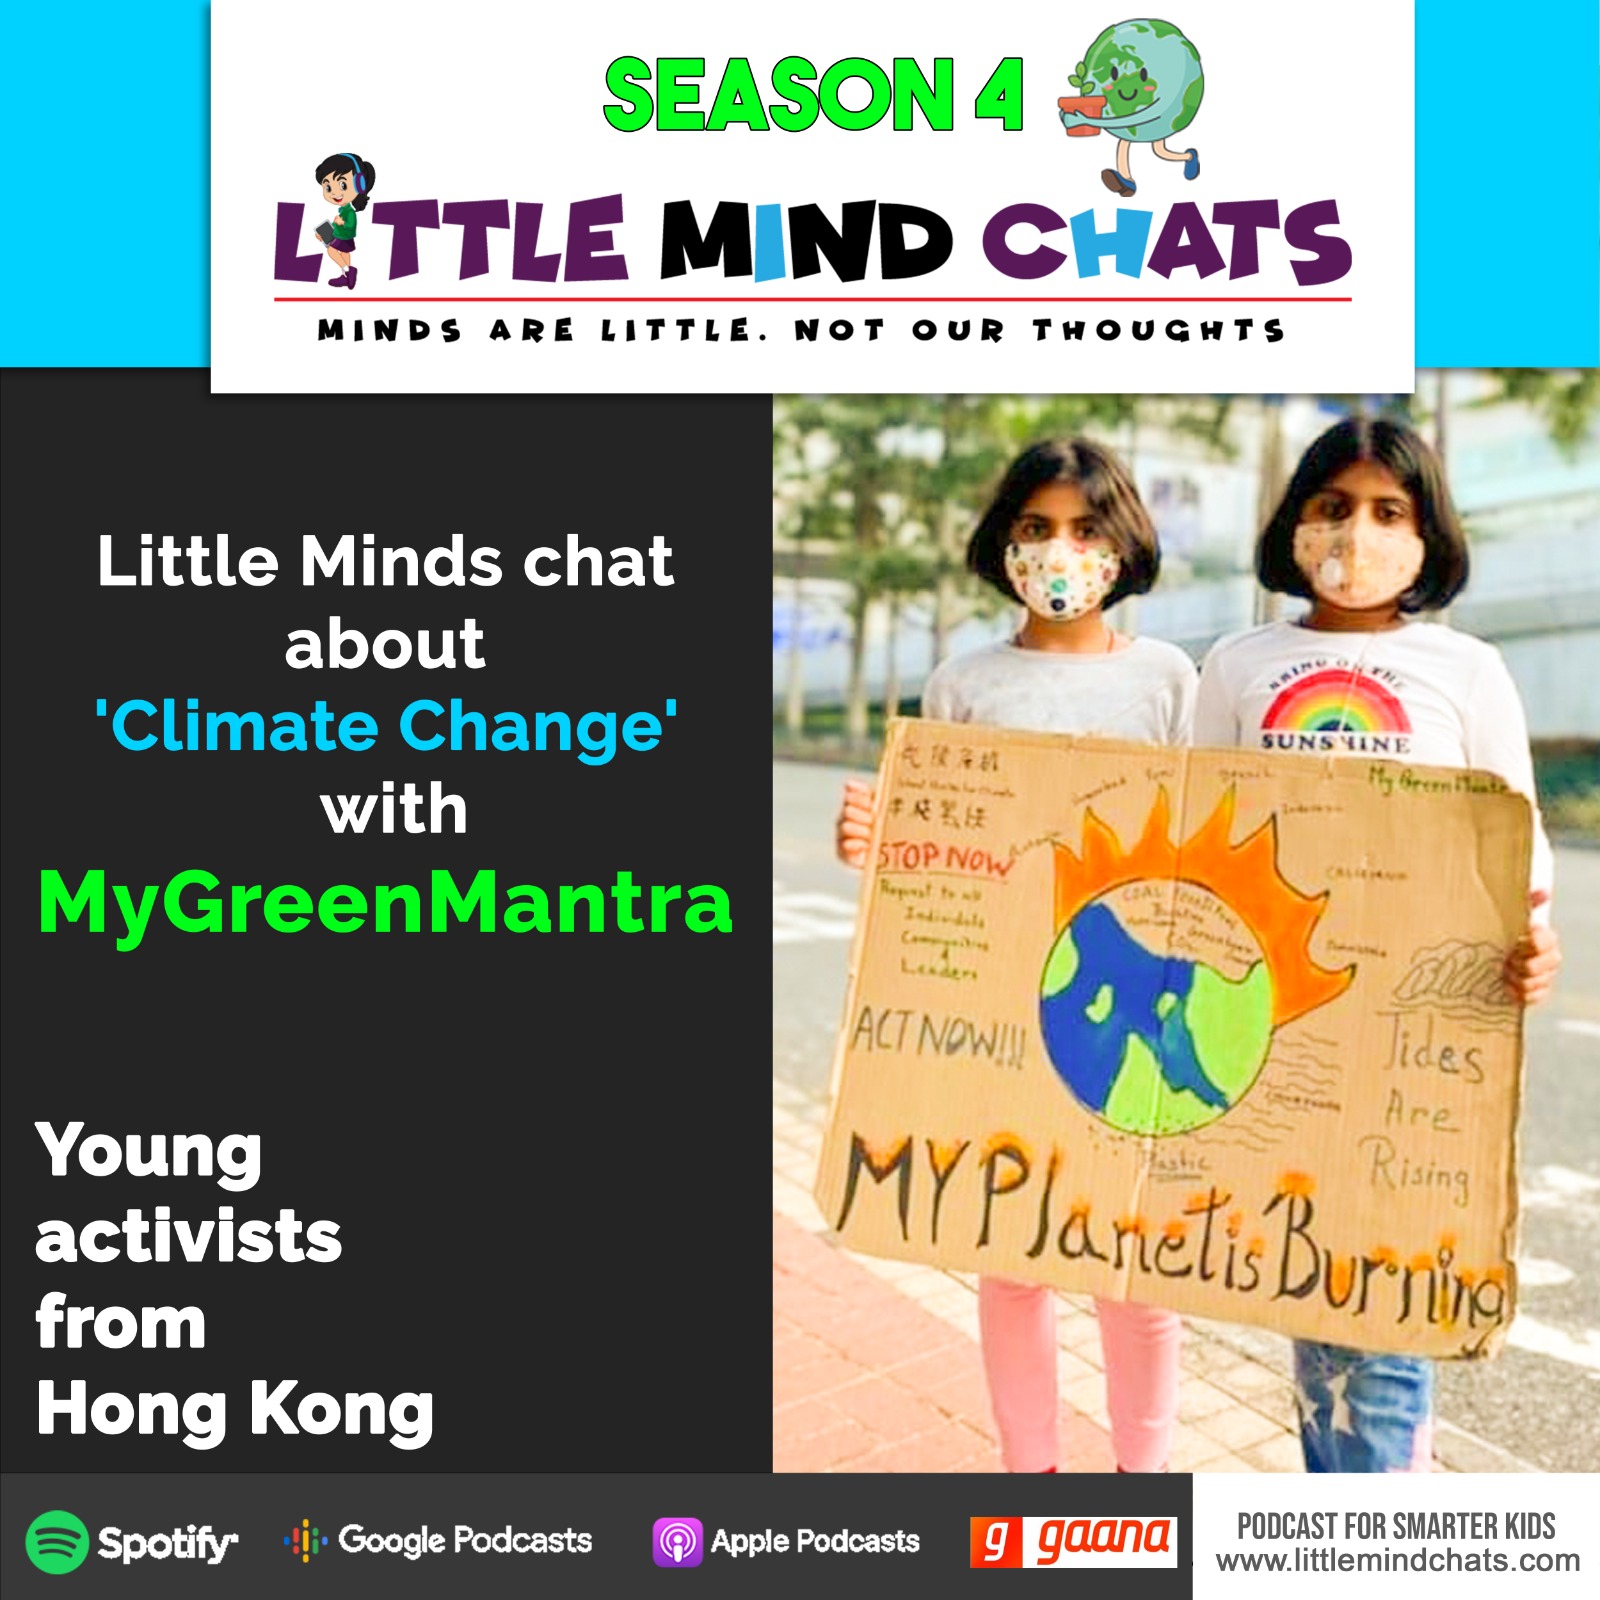 062: Little minds chat about ‘Climate Change’ – Mygreenmantra